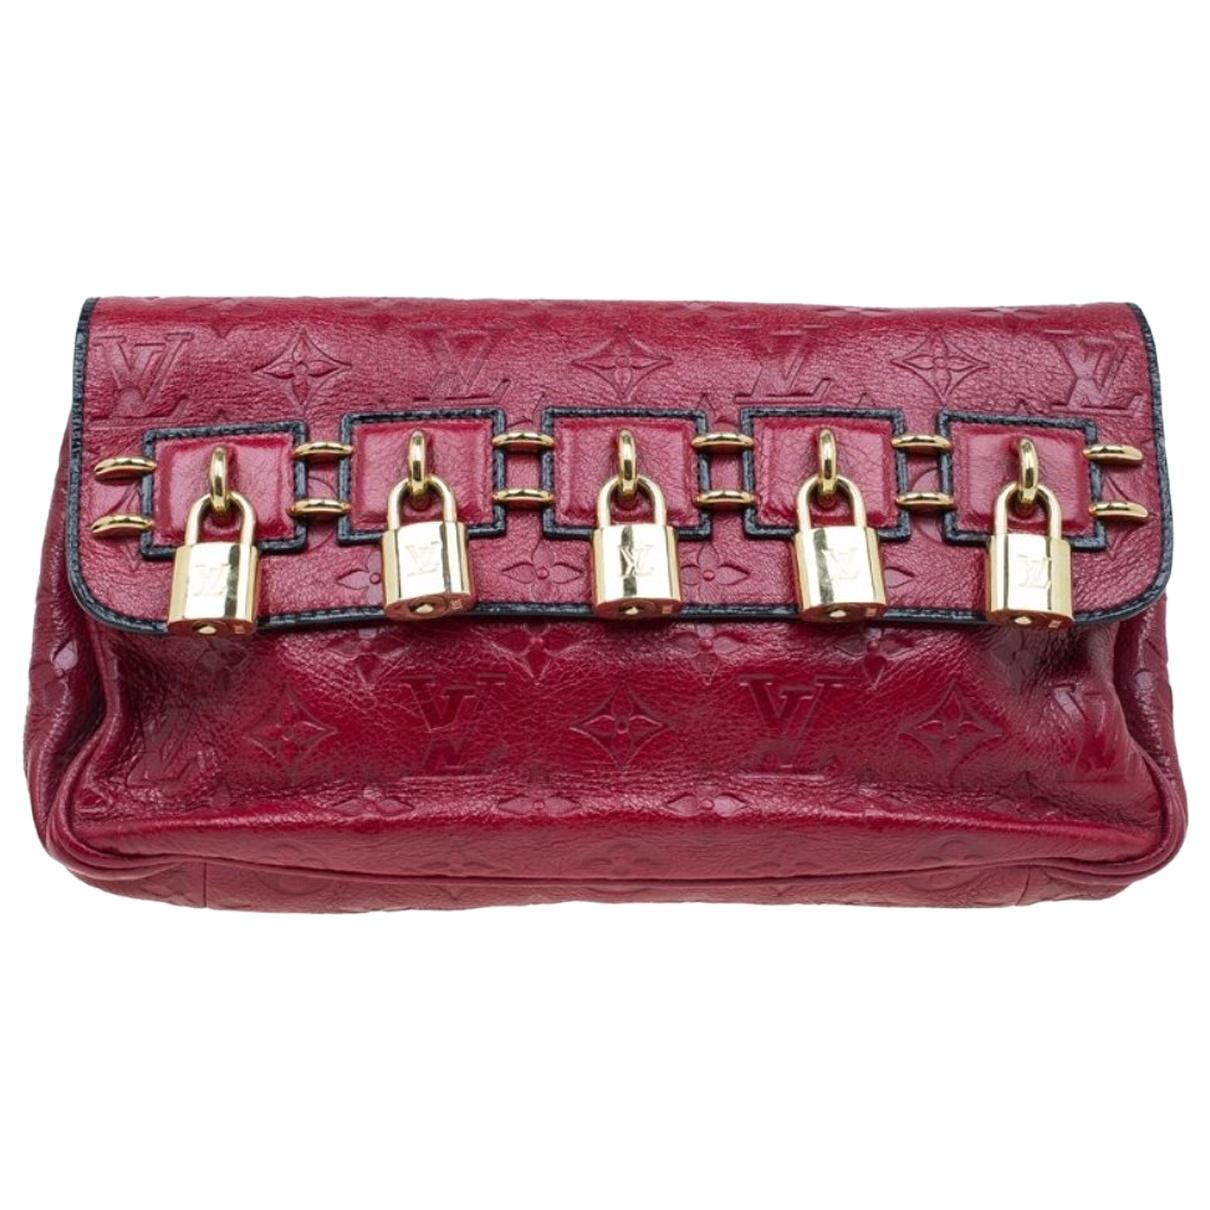 Lyst - Louis Vuitton Pre-owned Red Leather Clutch Bags in Red